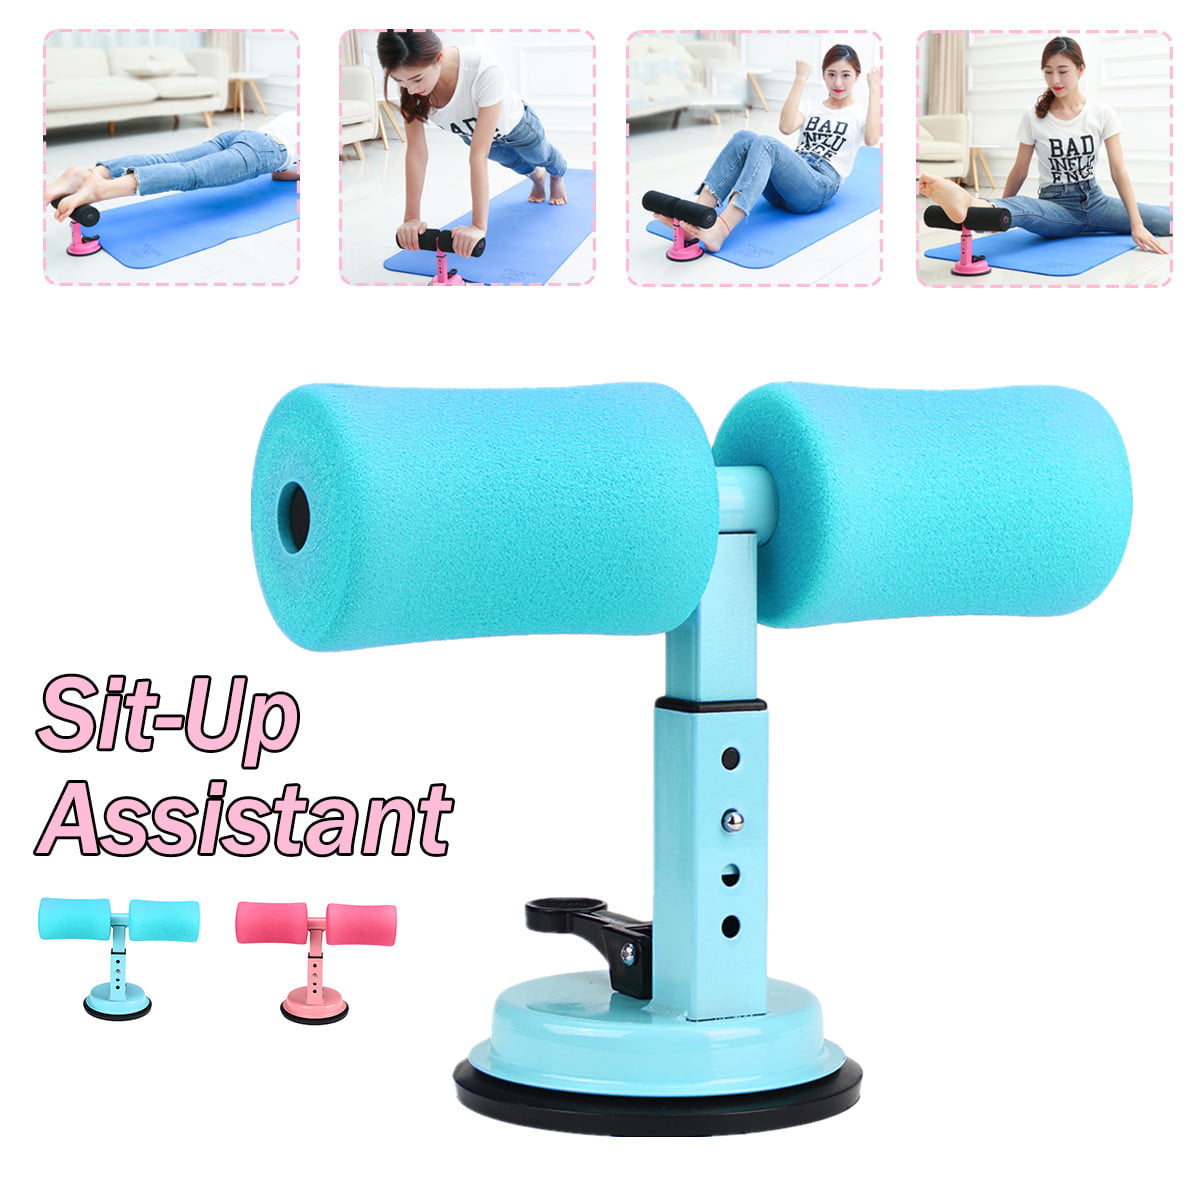 Self-Suction Sit Up Bars Assist Stand Fitness Exercise Equipment Muscle Training 